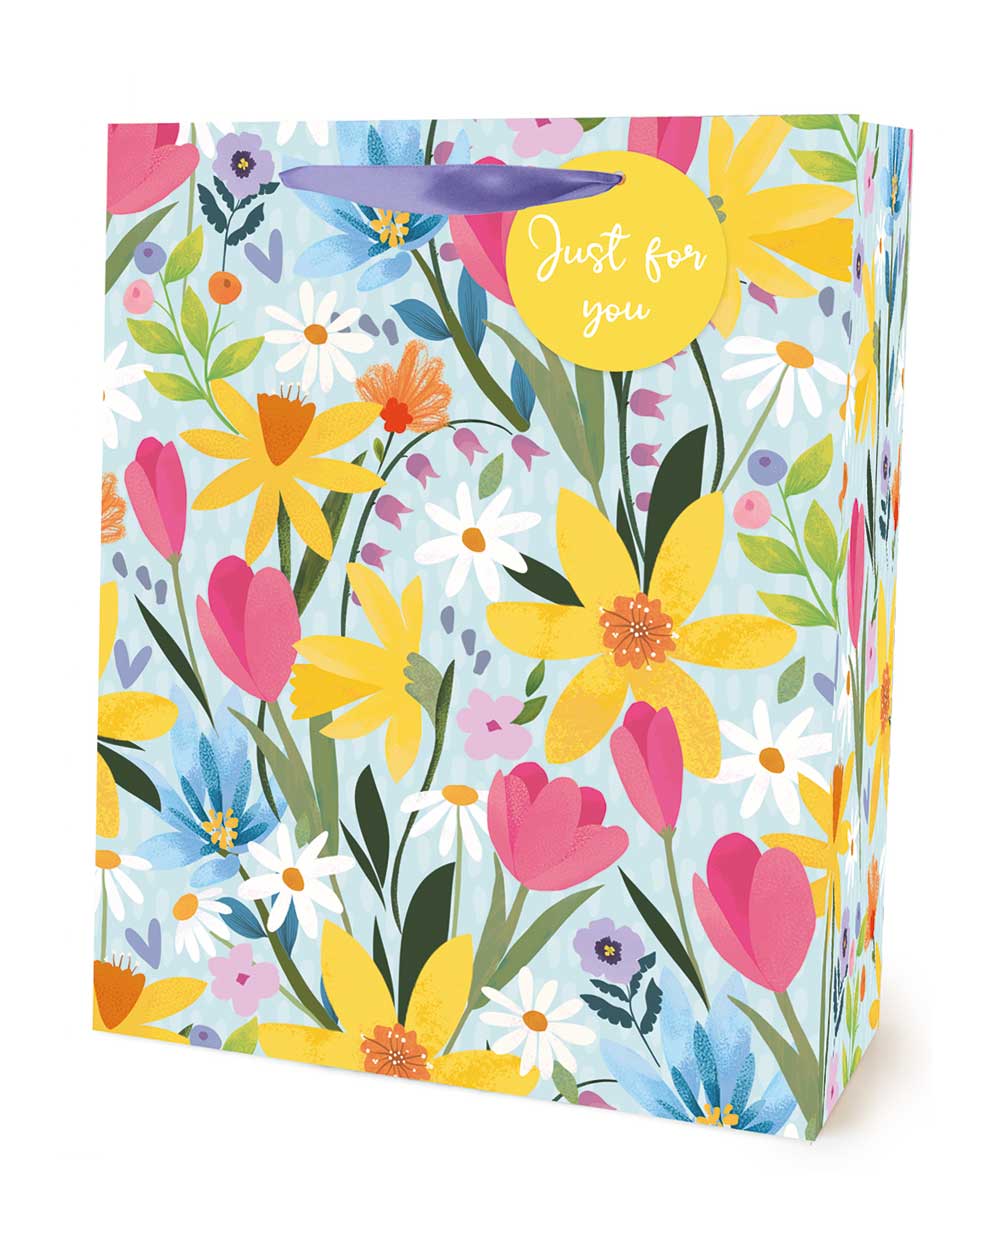 easter gift bag in size medium. Floral design with daffodils and tulips